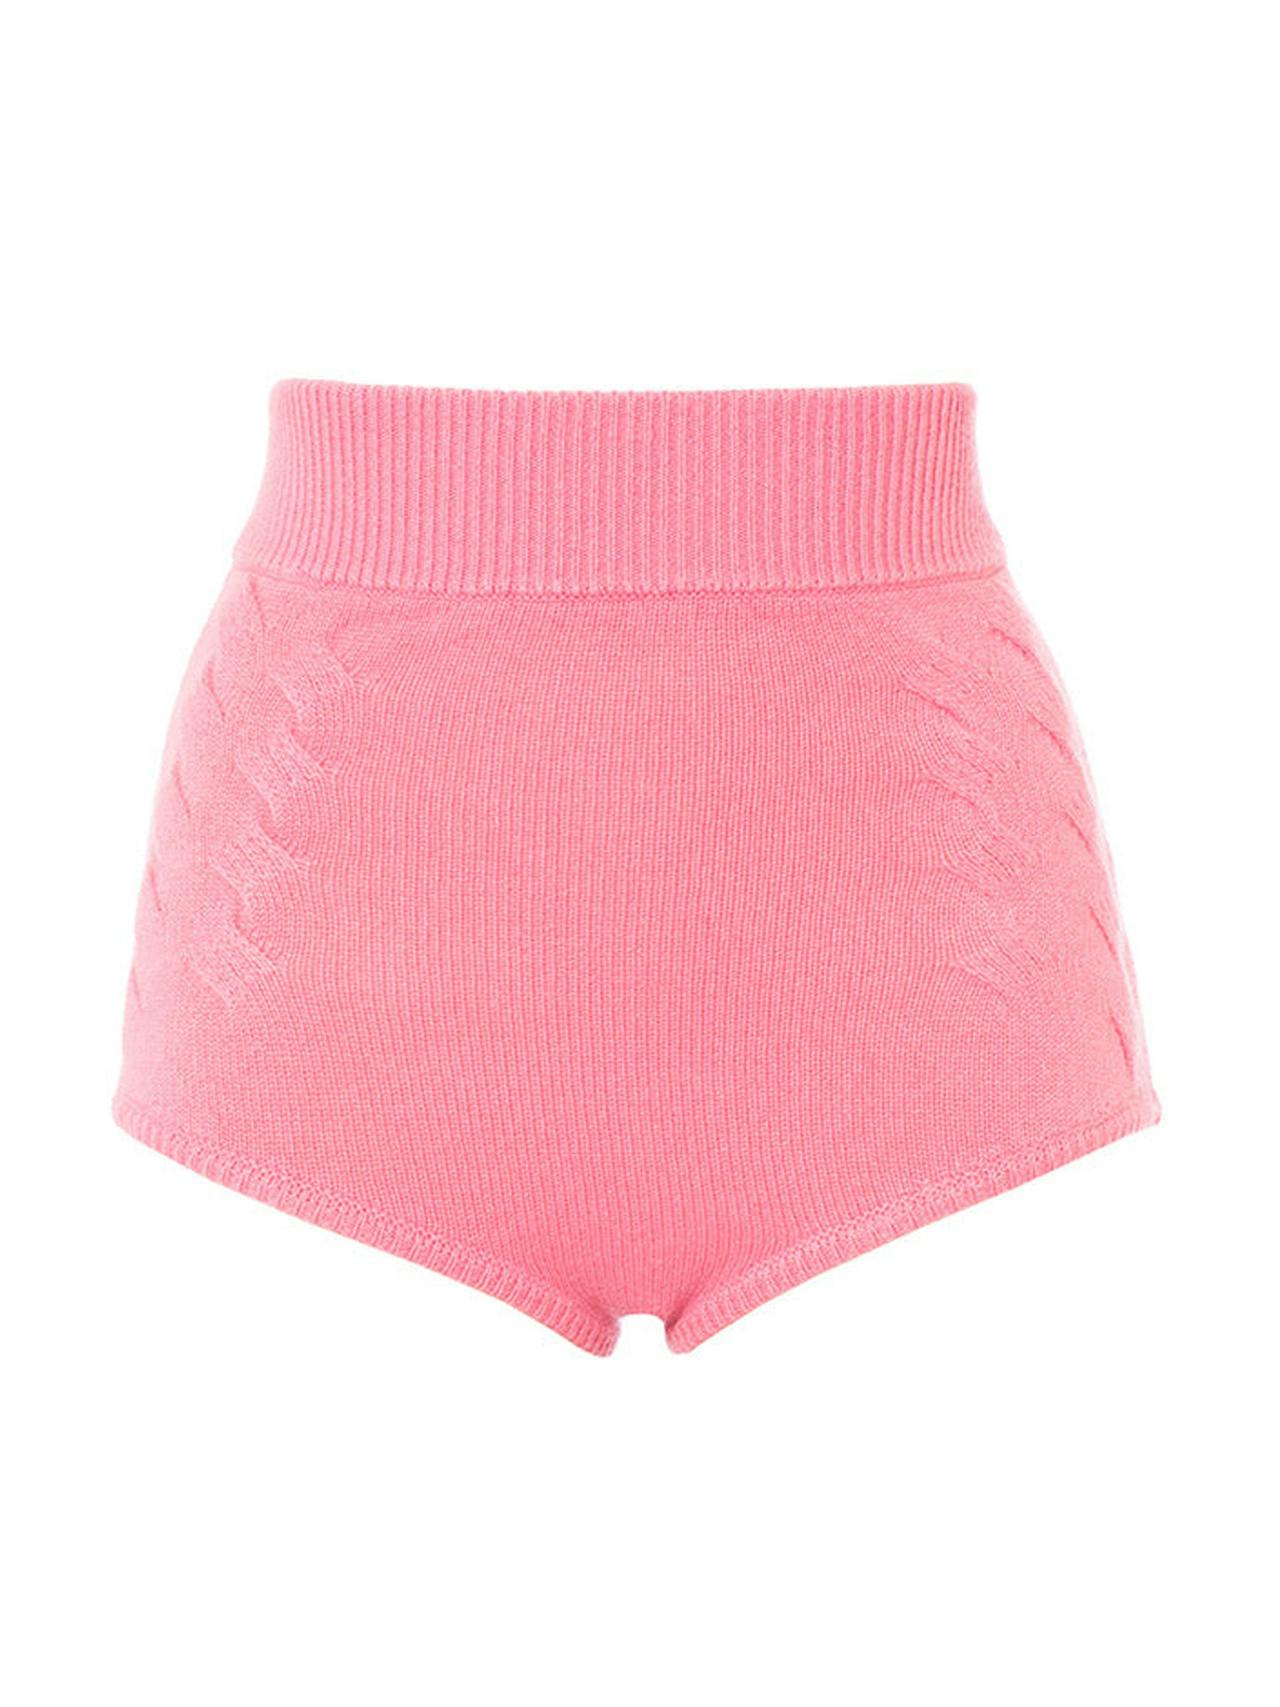 Mimie knitted knickers